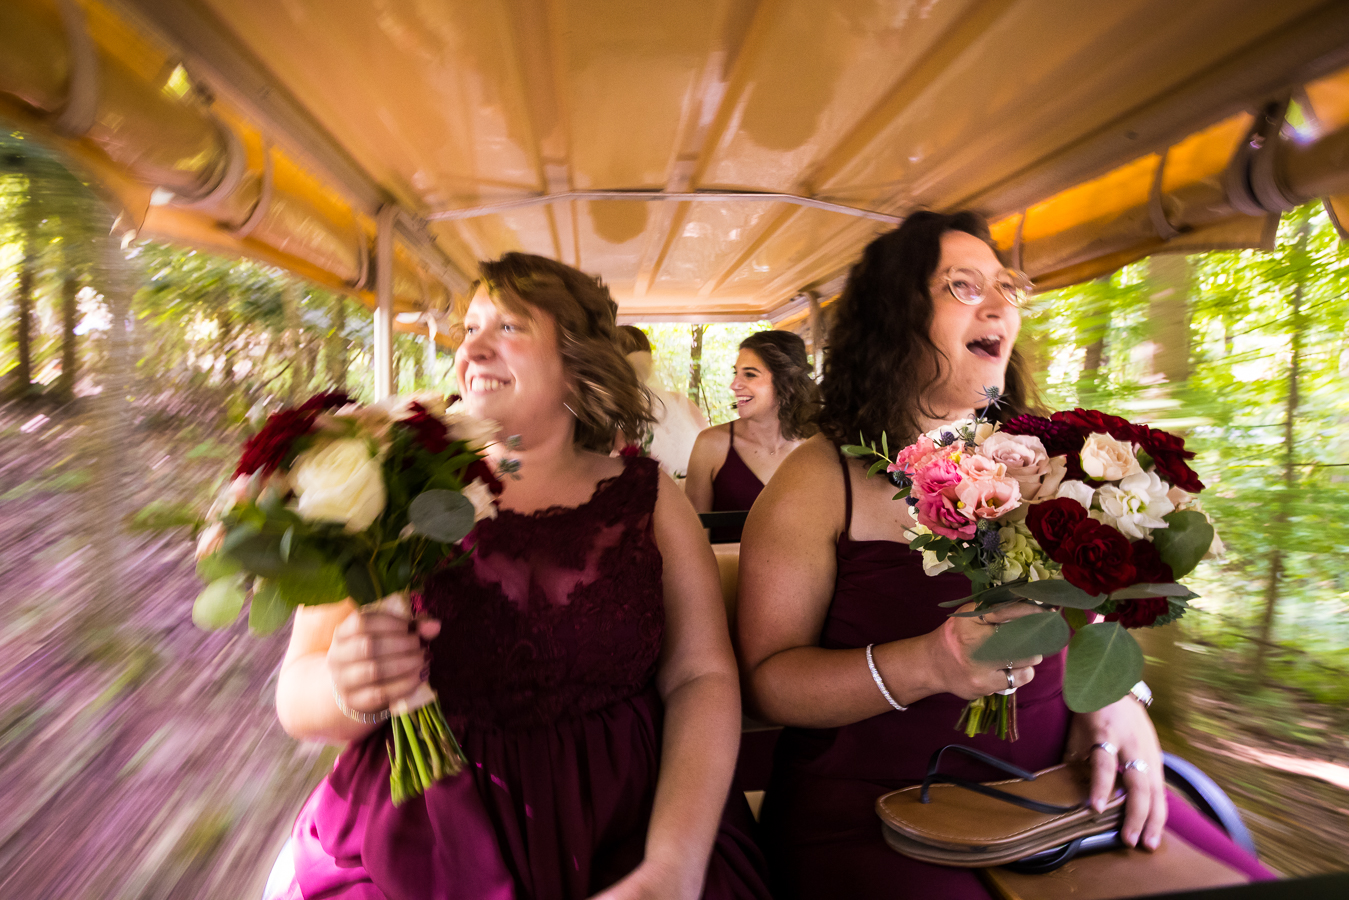 creative outdoor wedding photographer, lisa rhinehart, captures this unique, creative image of the bridesmaids as they ride in the golf cart to the wedding ceremony as the trees blur behind them